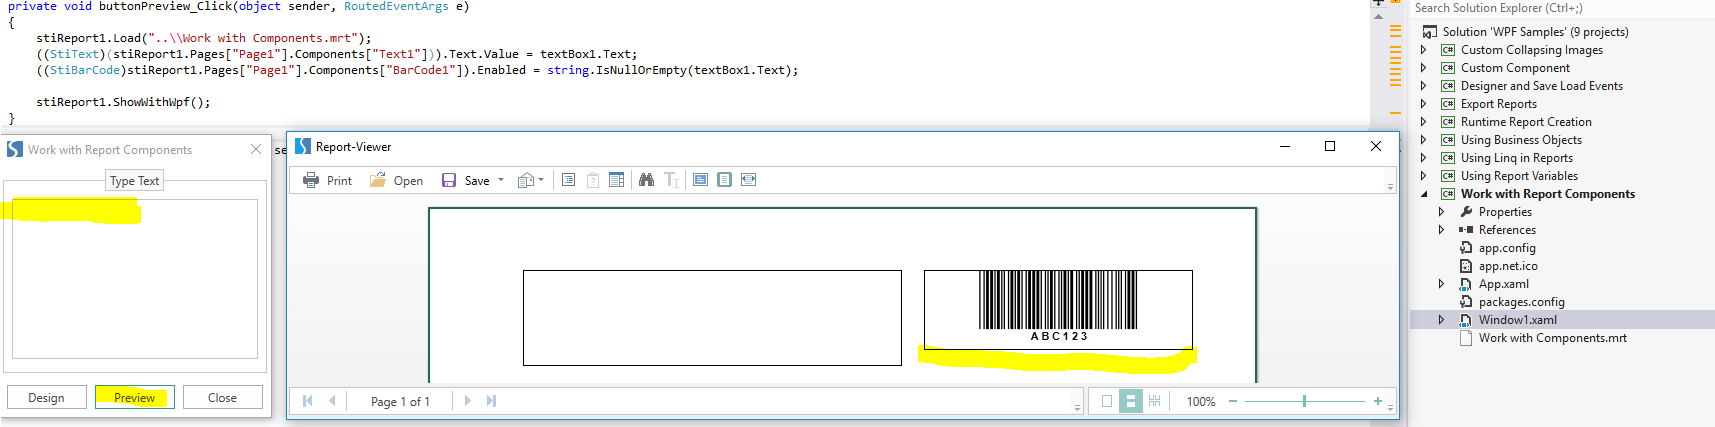 Remove Text, click Preview and BarCode1 will be printed